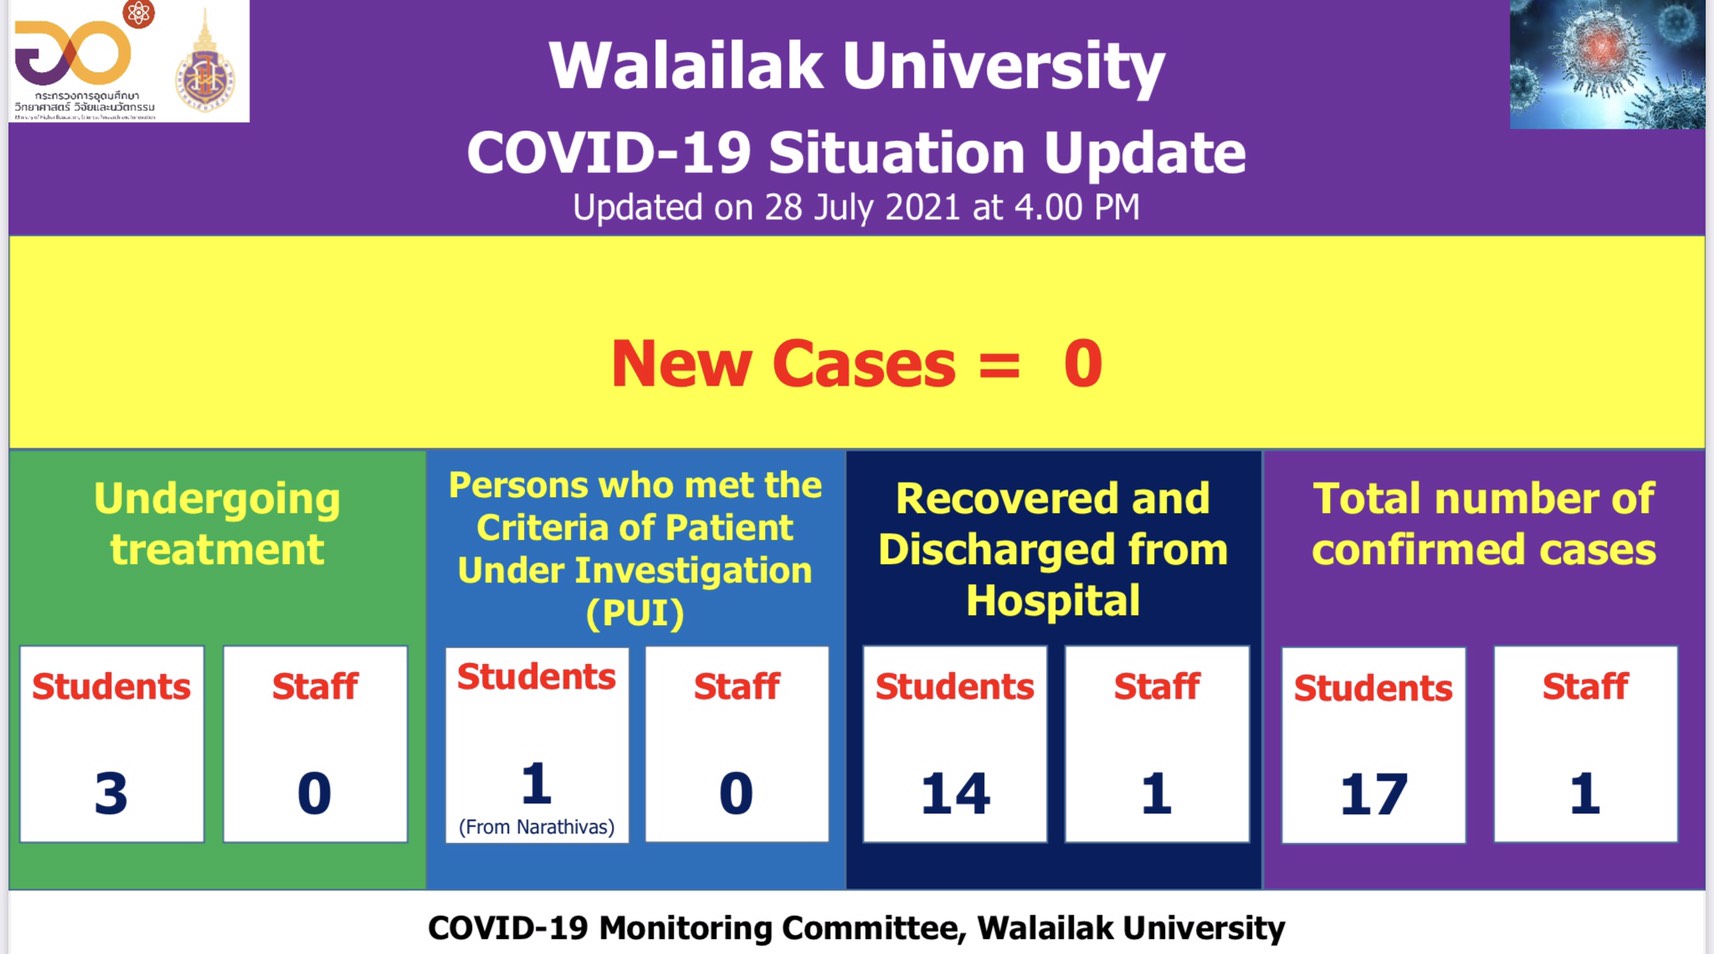 Covid-19 Situation Report of Walailak University - 28 July, 2021